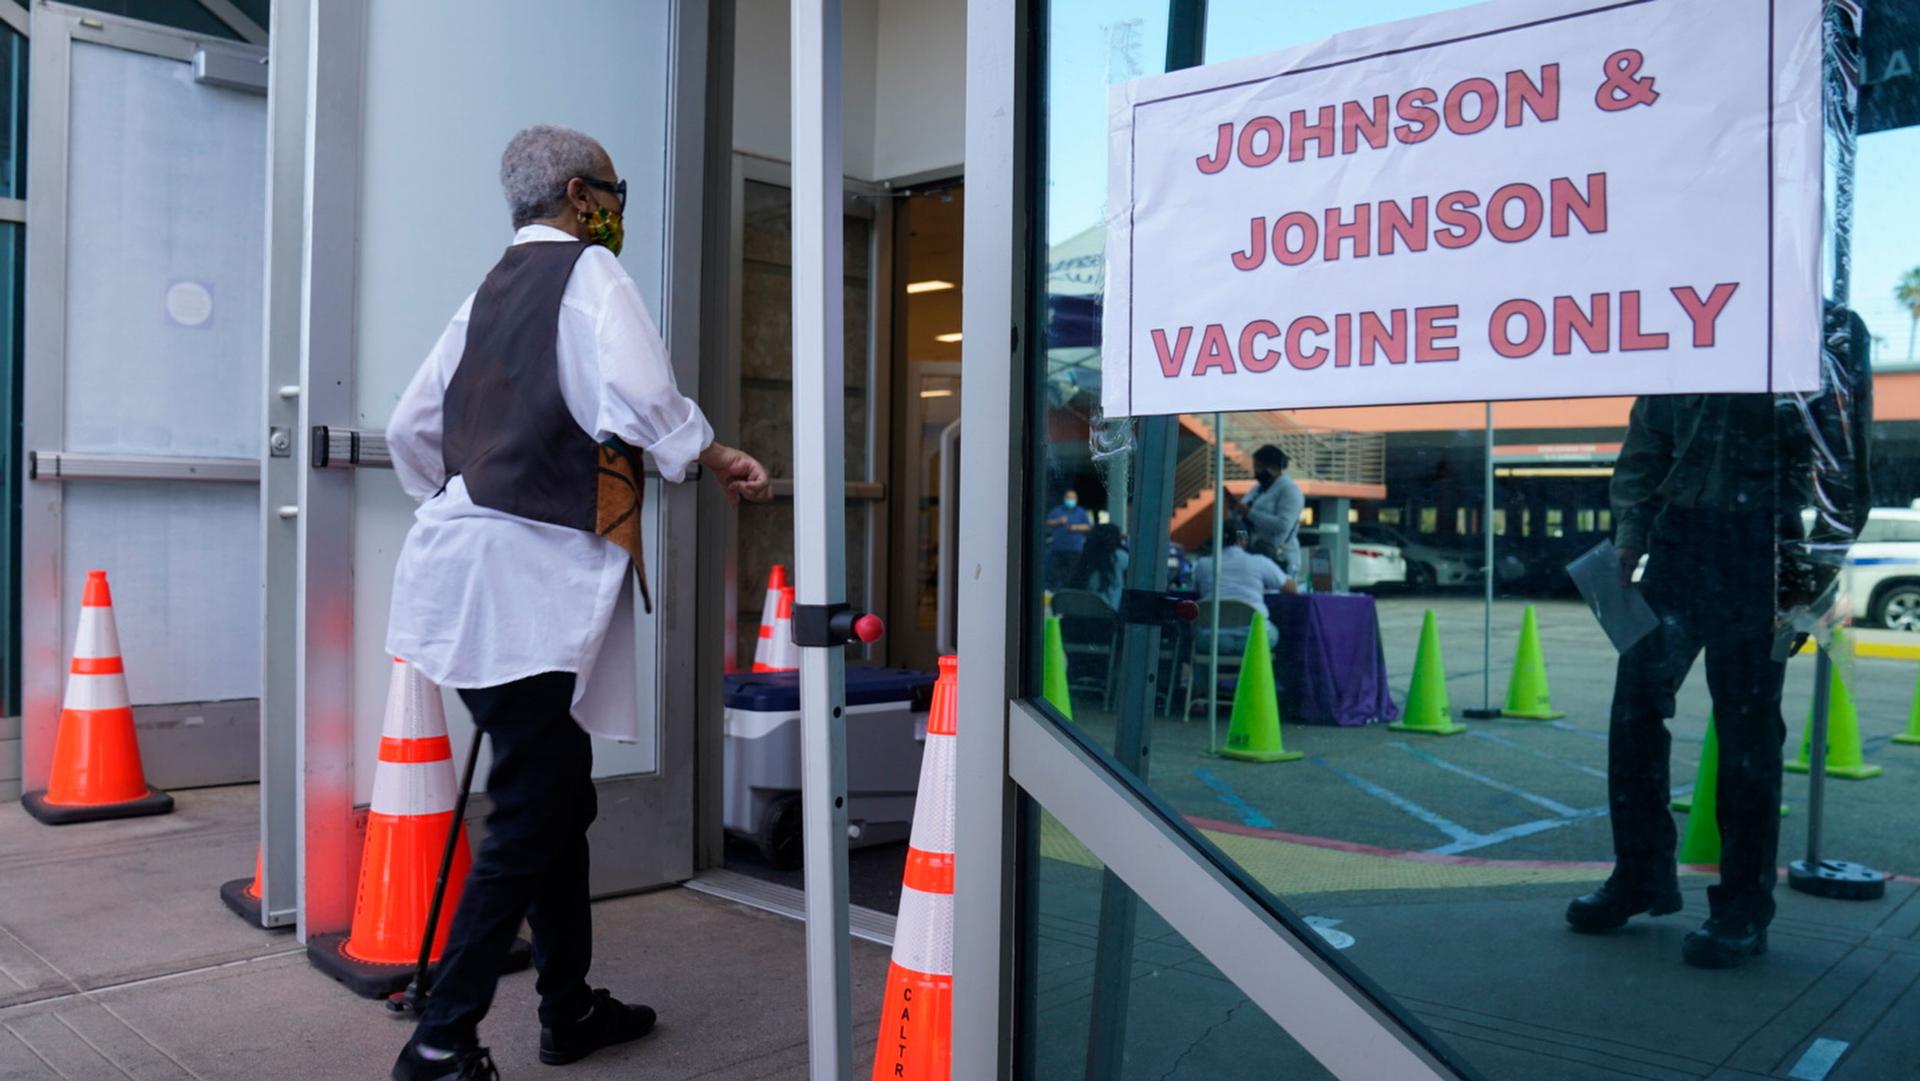 A person is shown wearing a dark vest and white shirt and walking with a cane into a facility with a Johnson & Johnson sign on the outside.